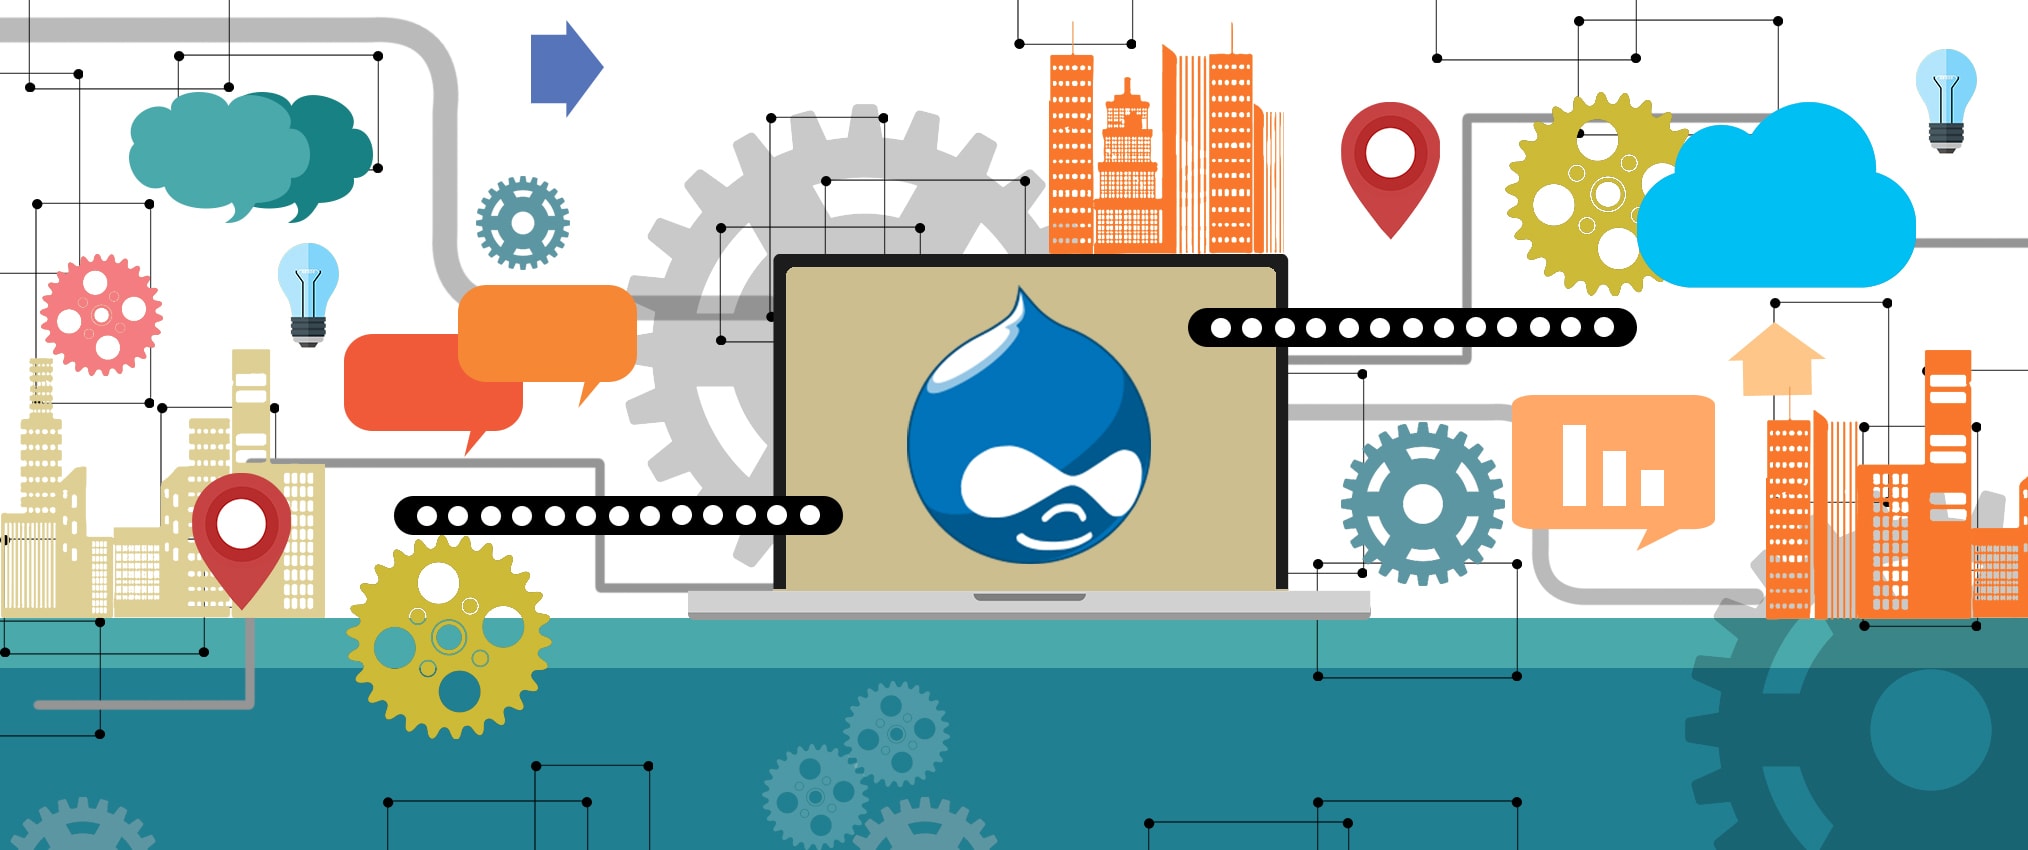 Top 5 Drupal Modules Your Site Must Have